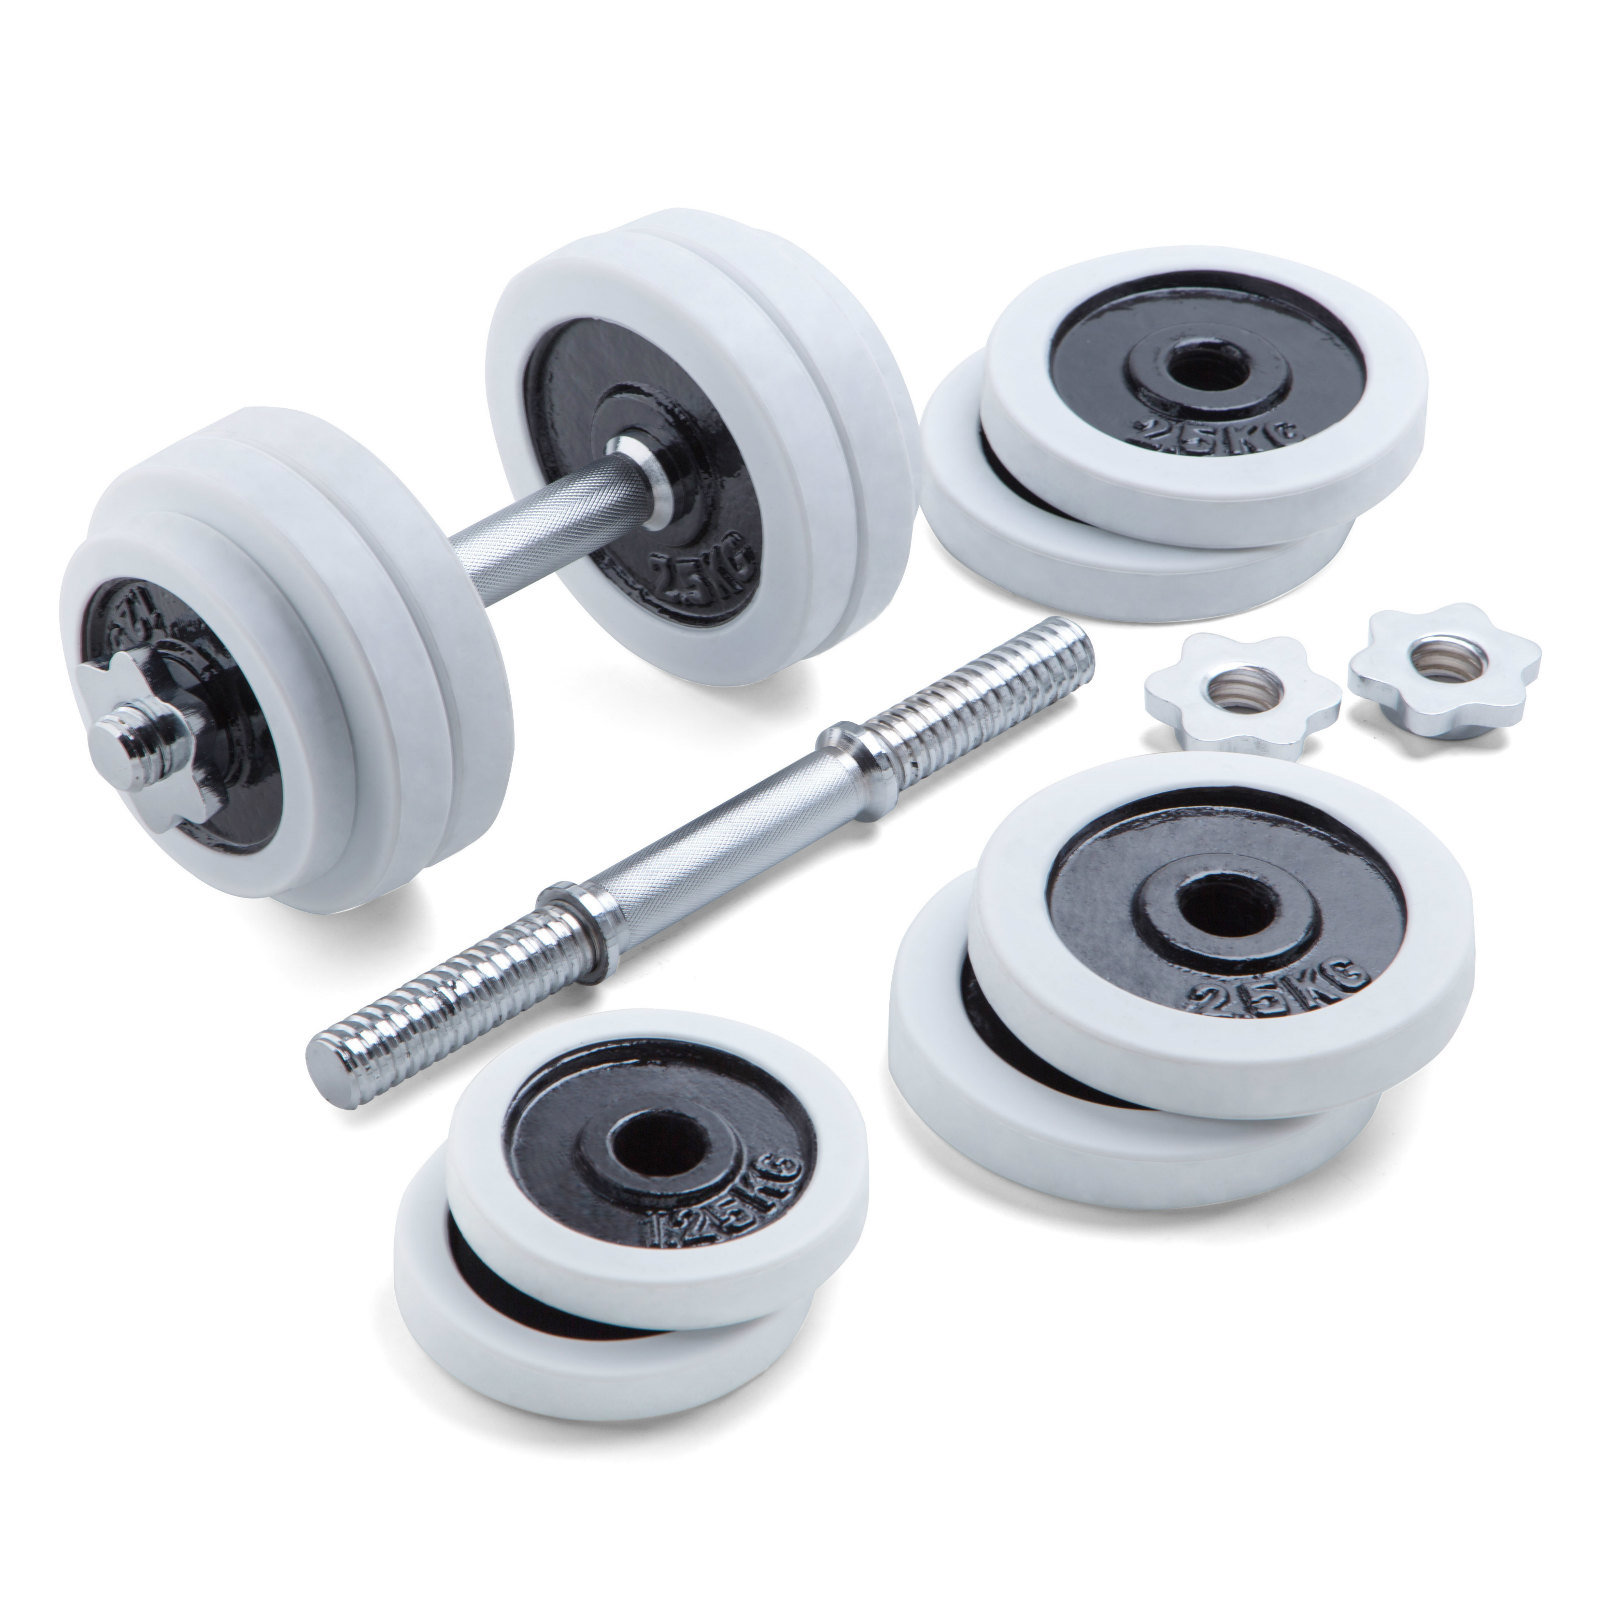 Dumbbell -15kg (silicon cover)